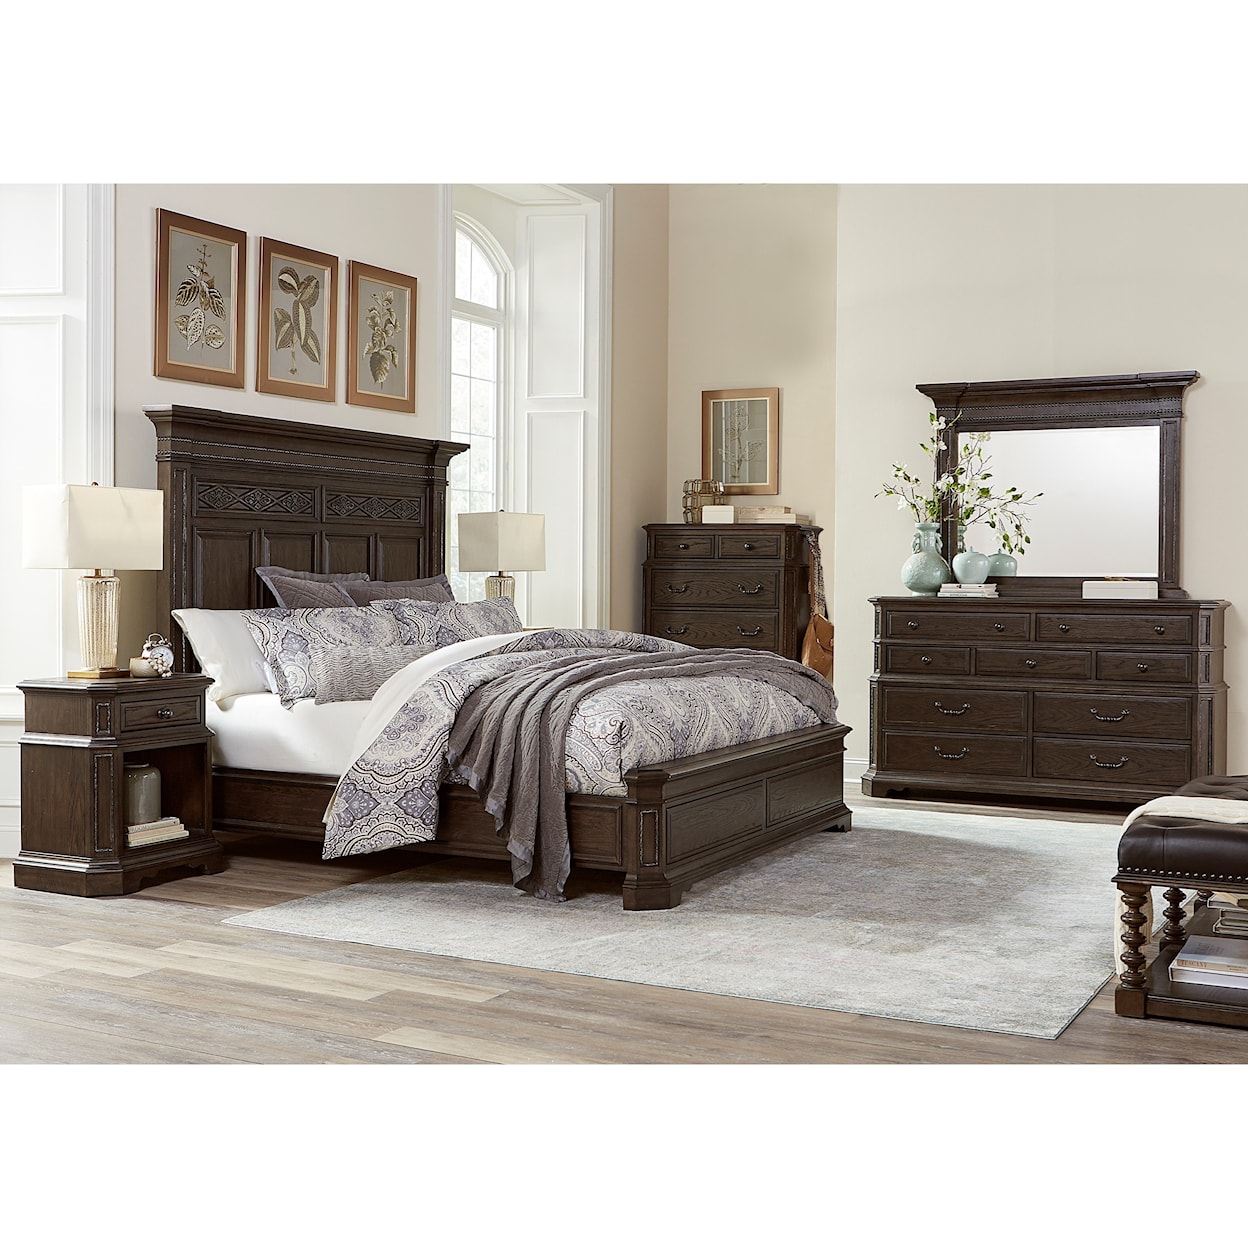 Aspenhome Foxhill King Estate Panel Bed